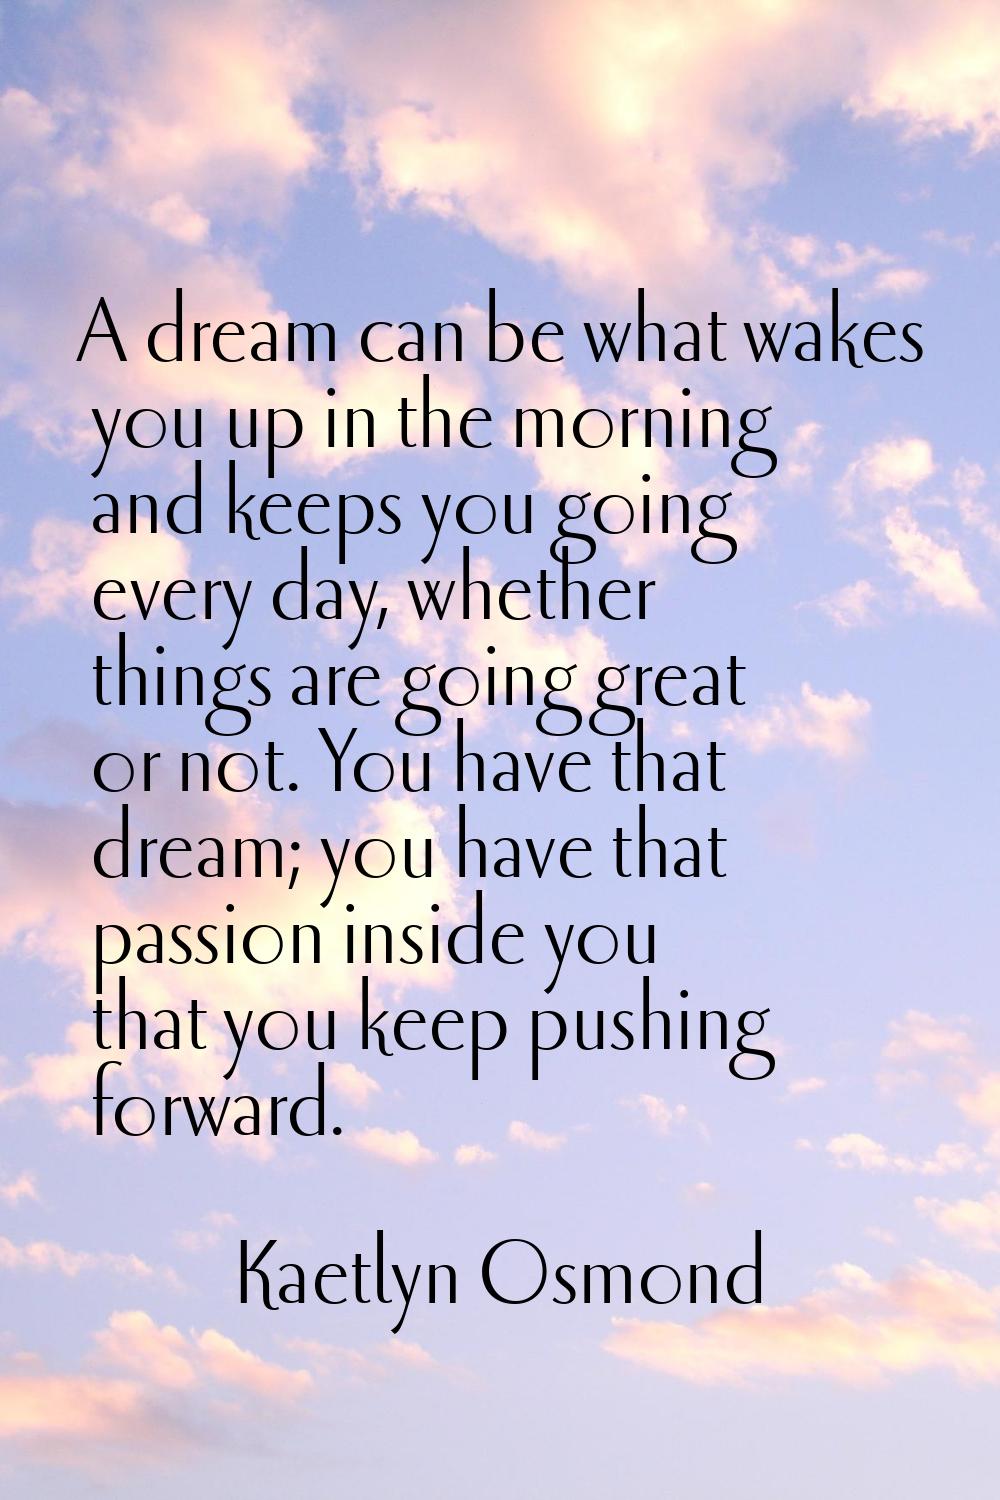 A dream can be what wakes you up in the morning and keeps you going every day, whether things are g